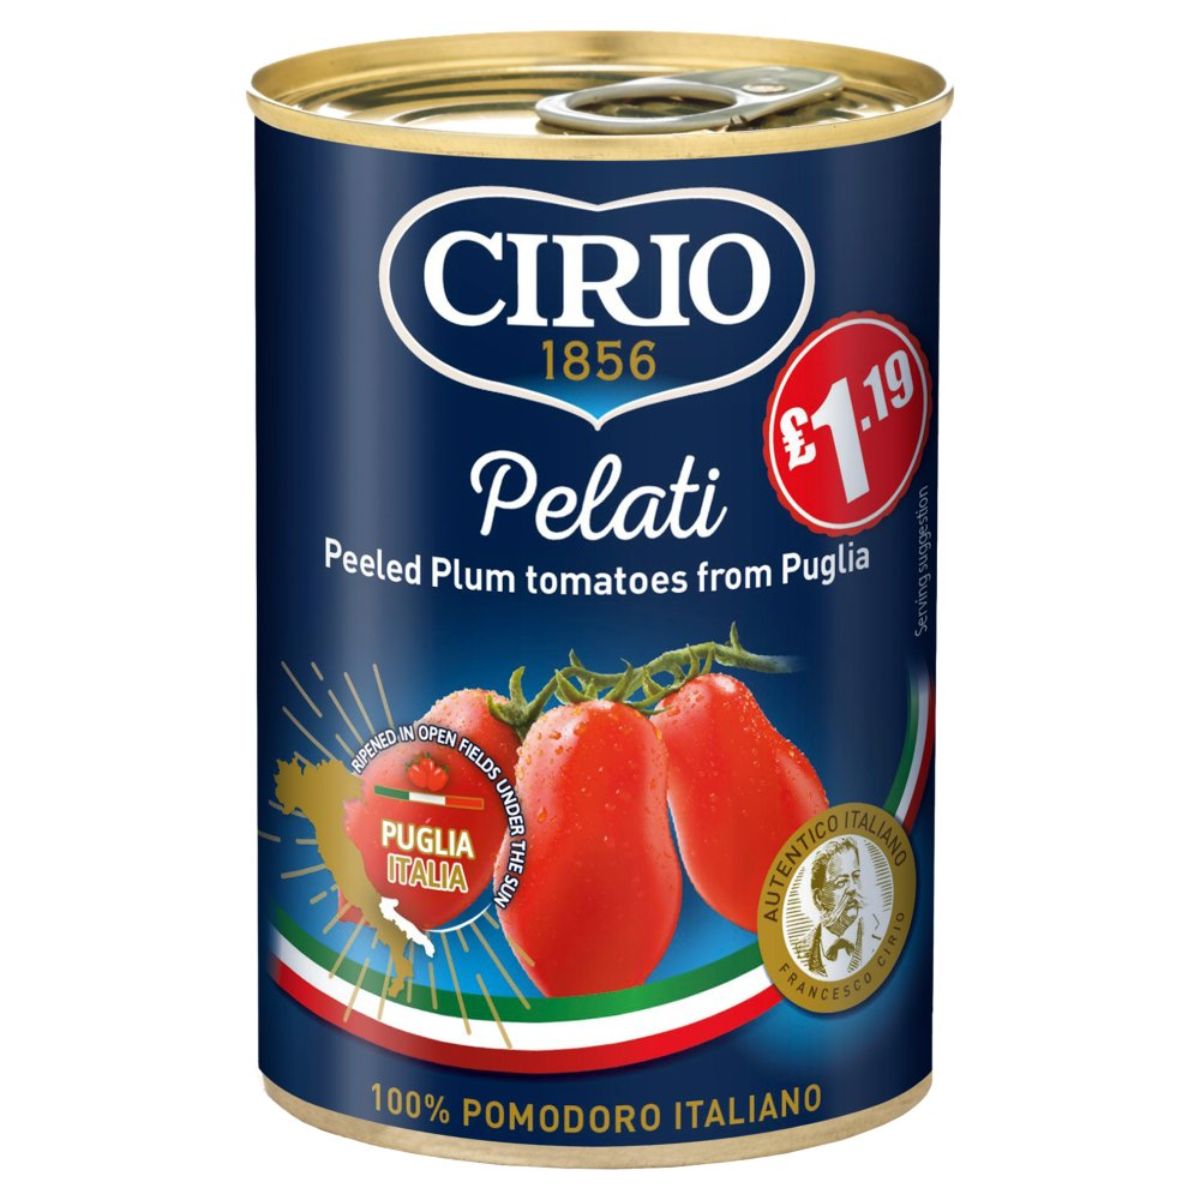 A can of Cirio - Peeled Plum Tomatoes - 400g with tomatoes.